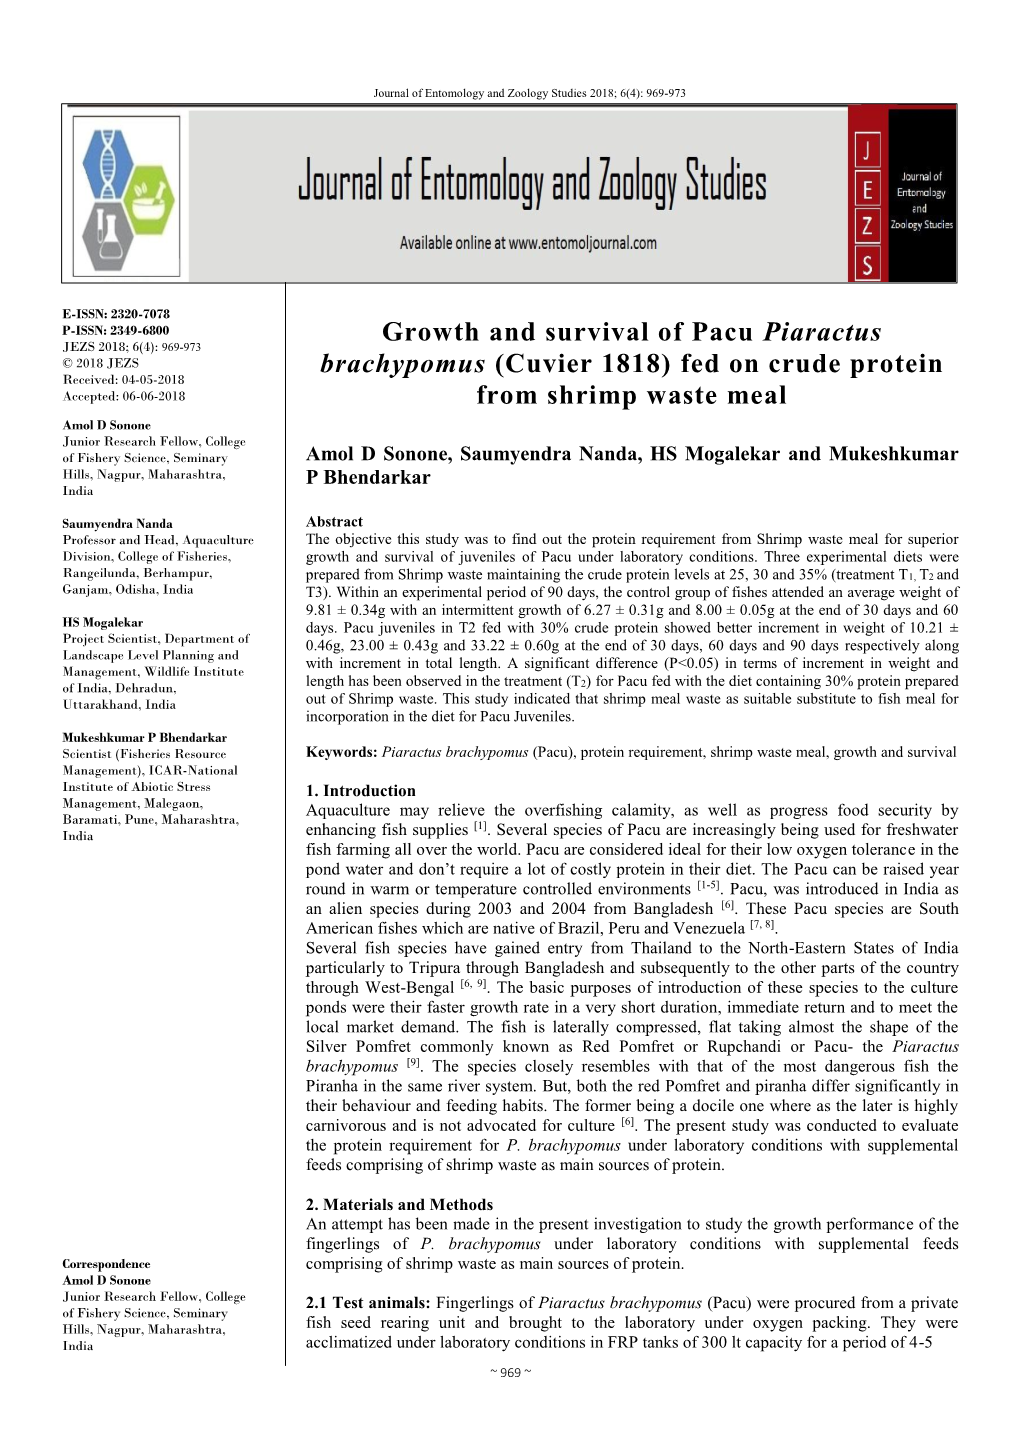 Growth and Survival of Pacu Piaractus Brachypomus (Cuvier 1818) Fed on Crude Protein from Shrimp Waste Meal